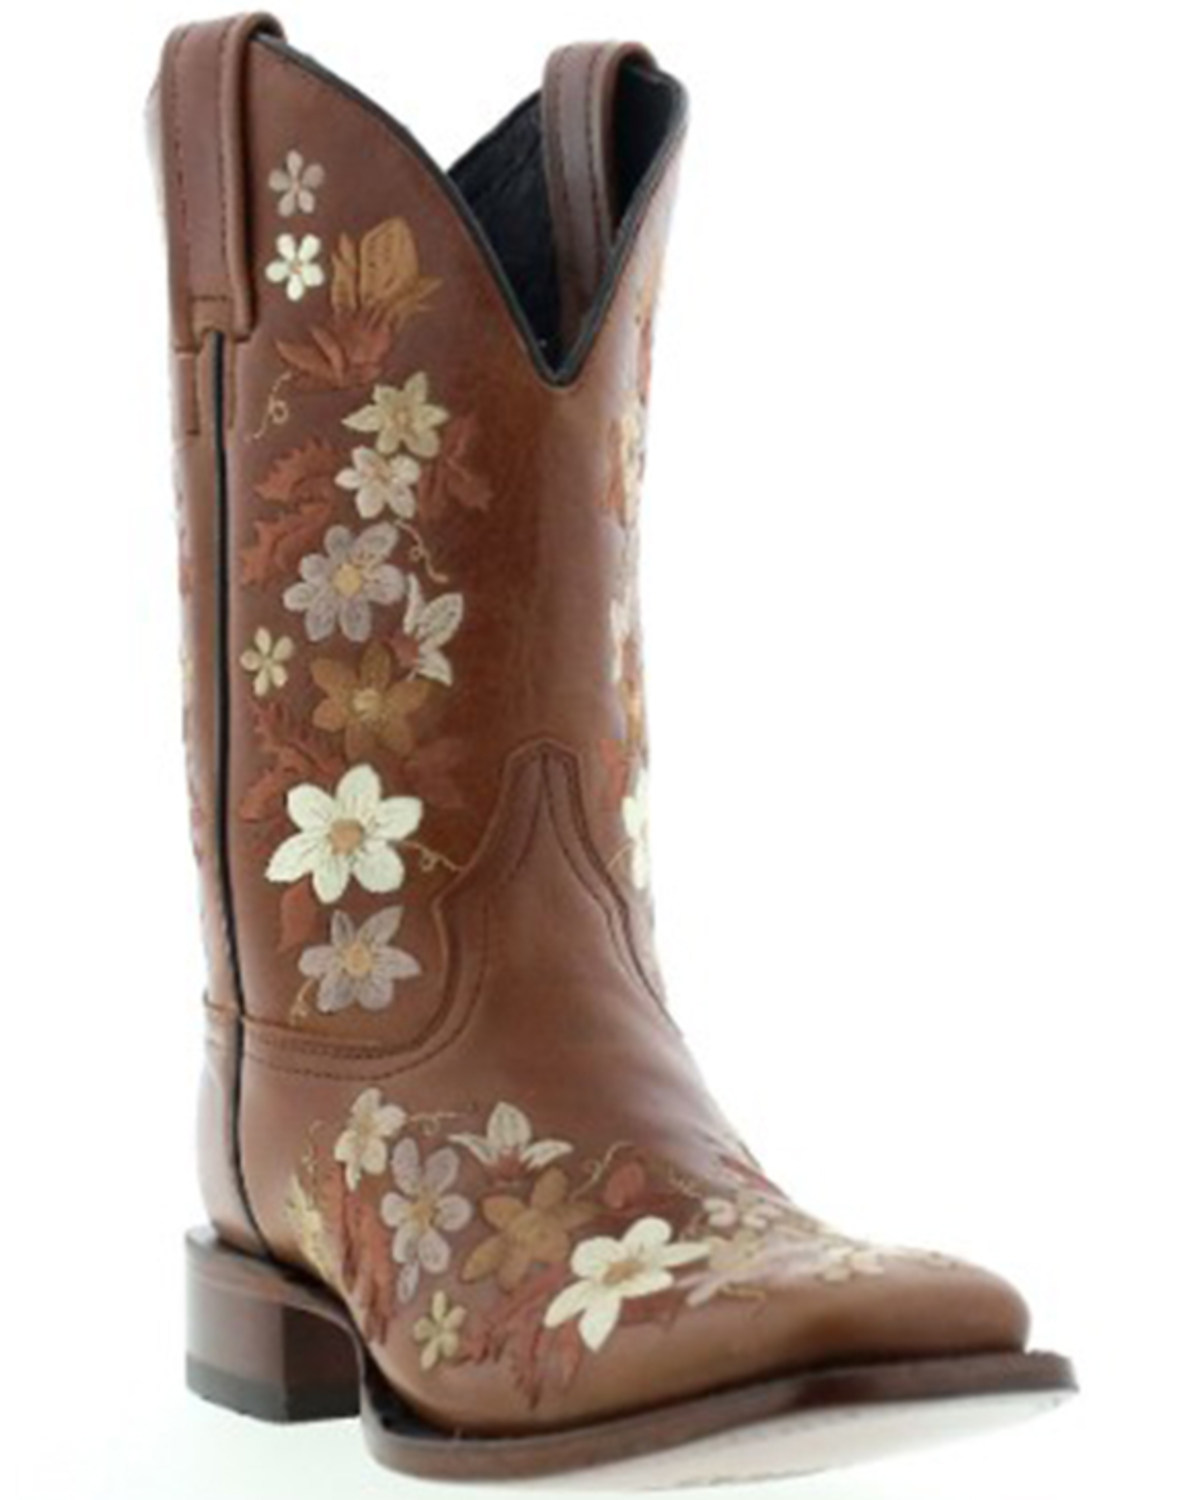 Botas Caborca For Liberty Black Women's Floral Embroidered Western Boots - Square Toe